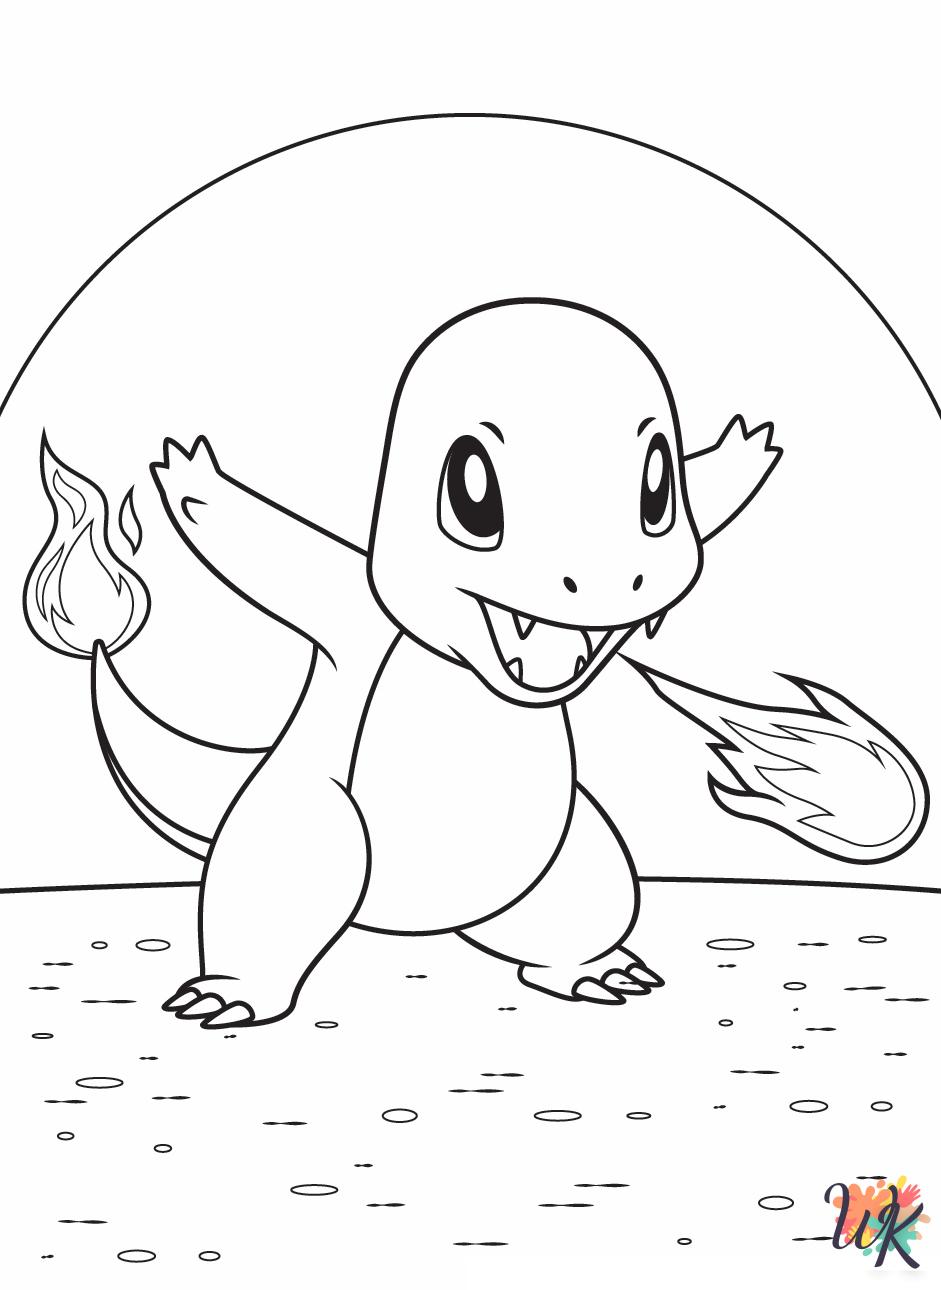 Charmander coloring book pages